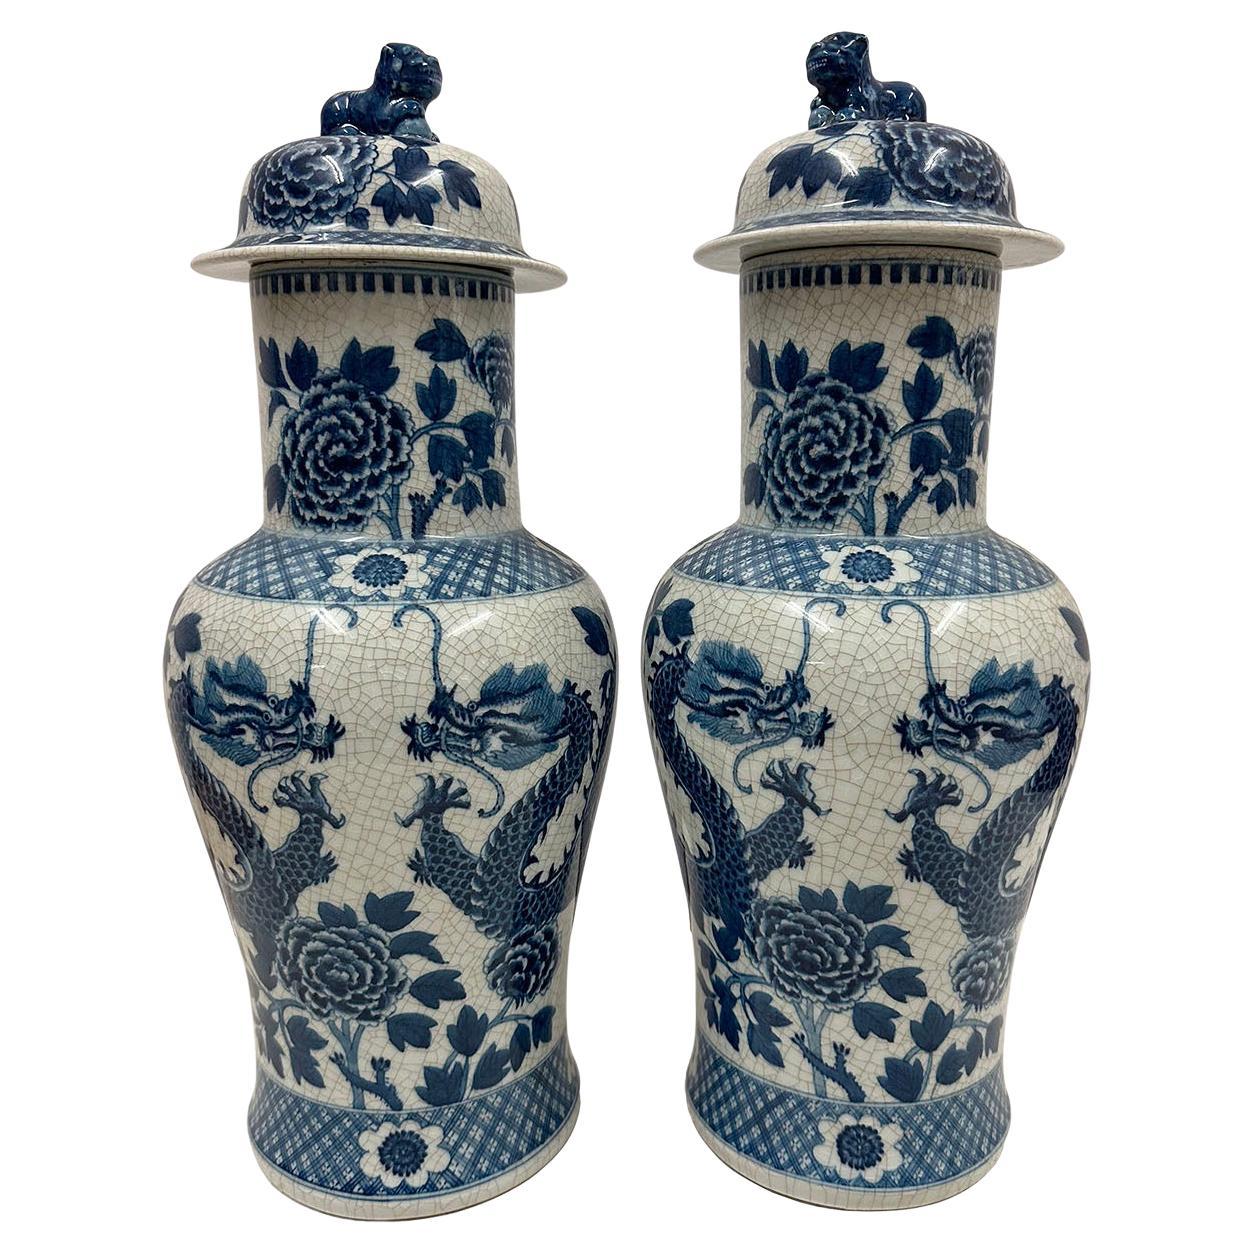 Pair of Mid-20th Century Chinese Blue and White Dragon Porcelain Vases with Lid